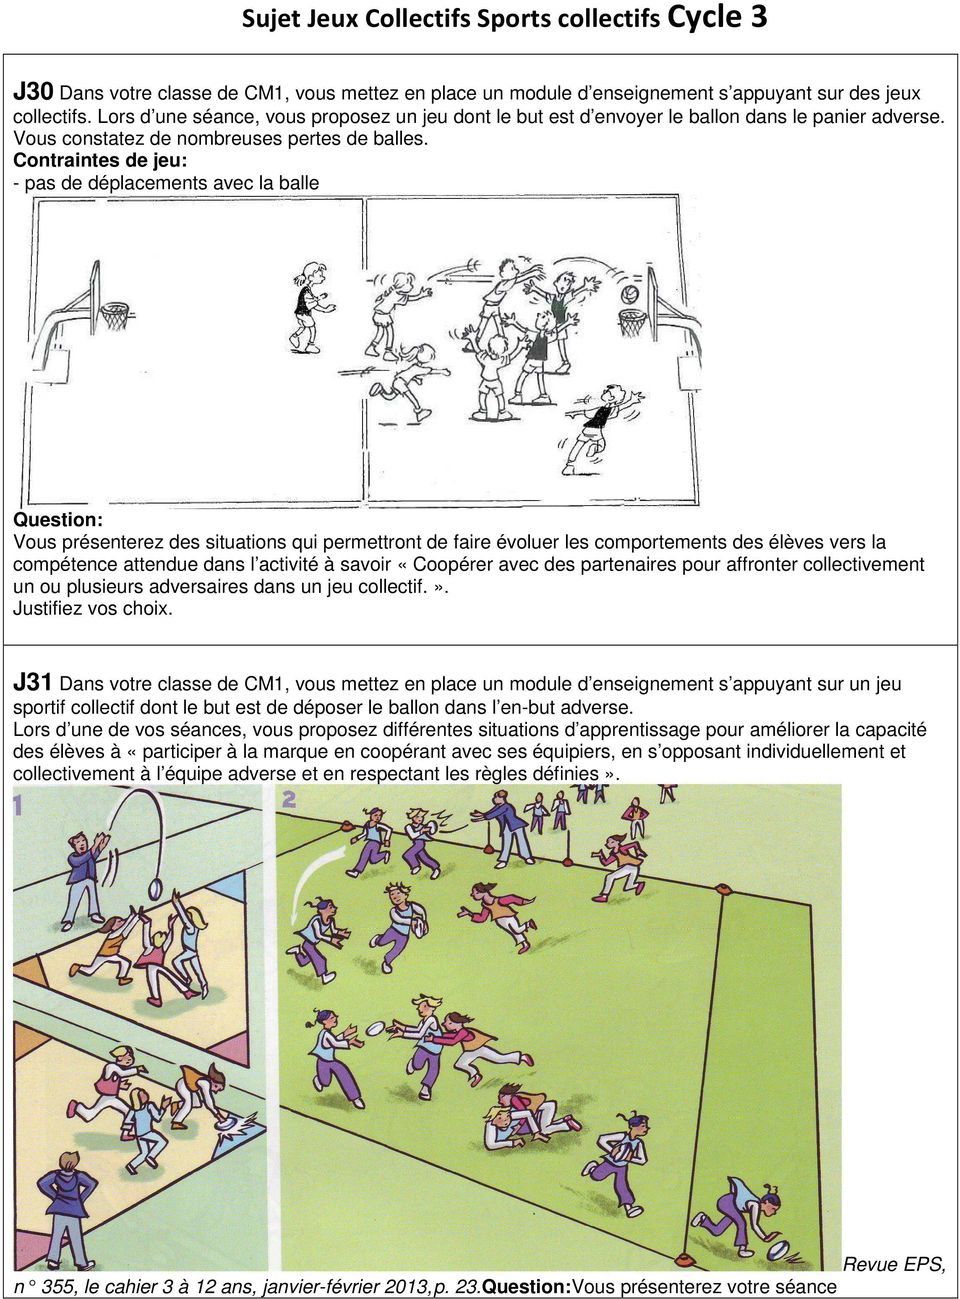 Sujet Jeux Collectifs Sports Collectifs Cycle 1 Pdf Free Download